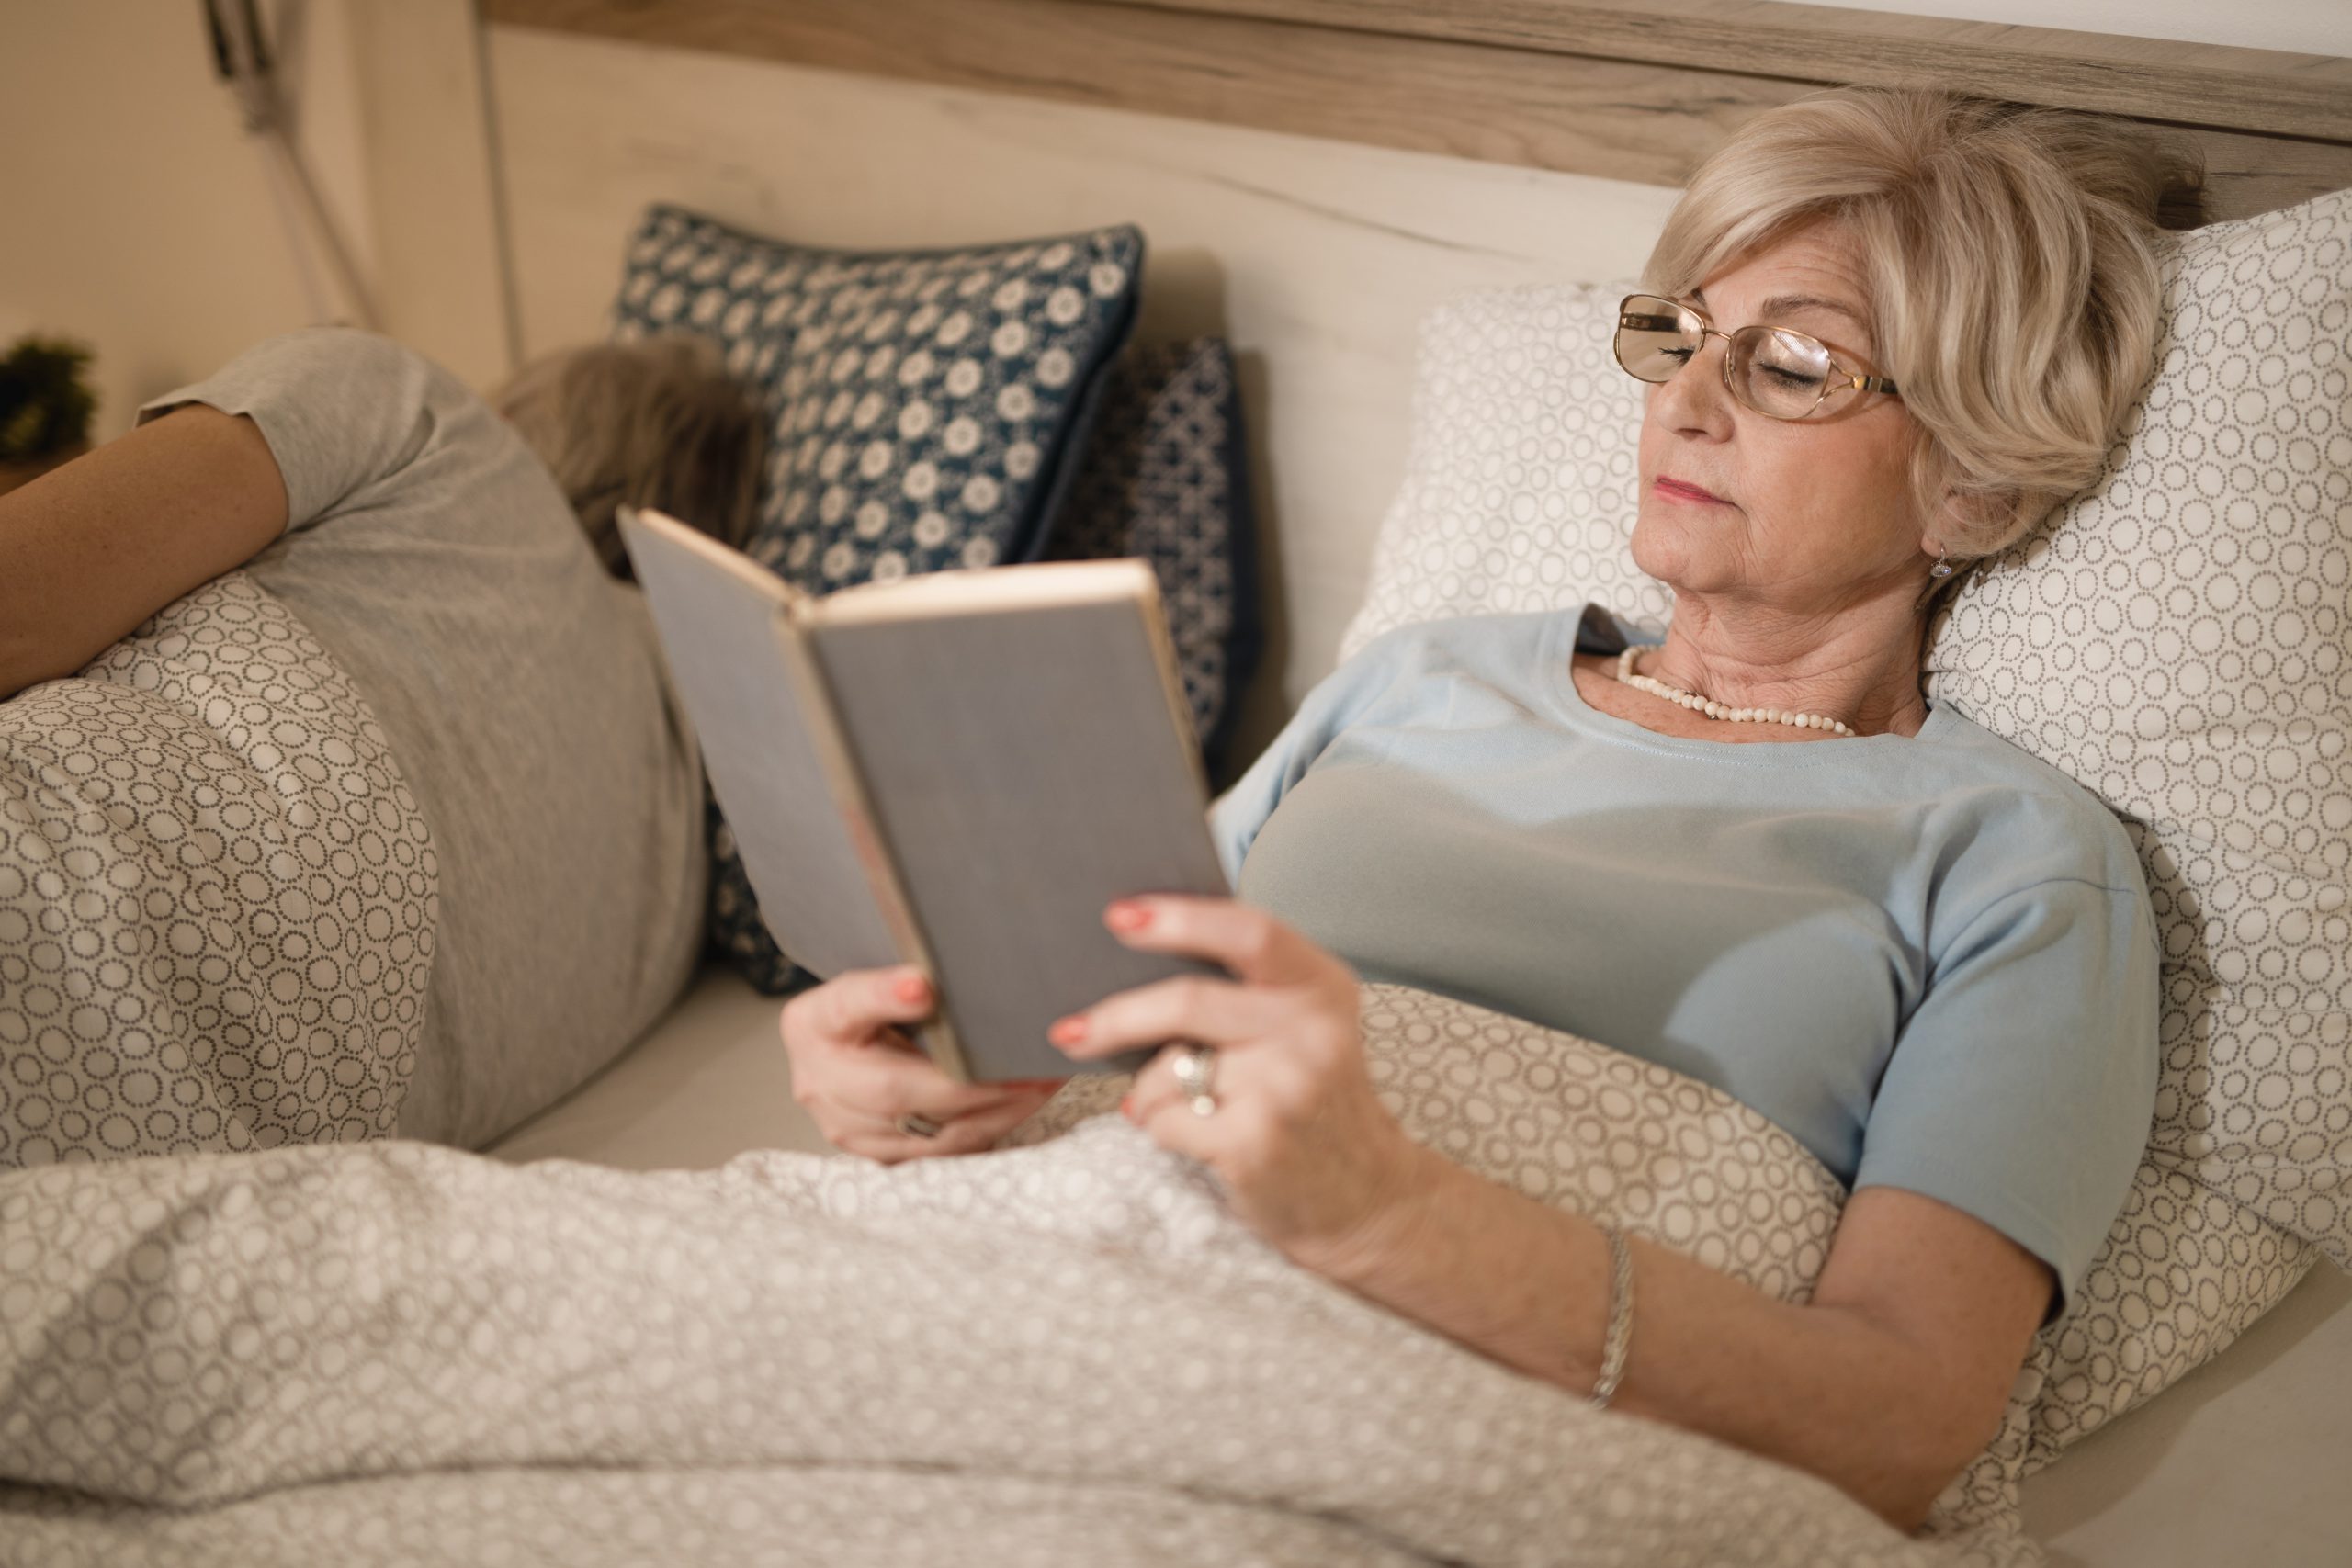 10 Bedtime Stories for Adults in 2022